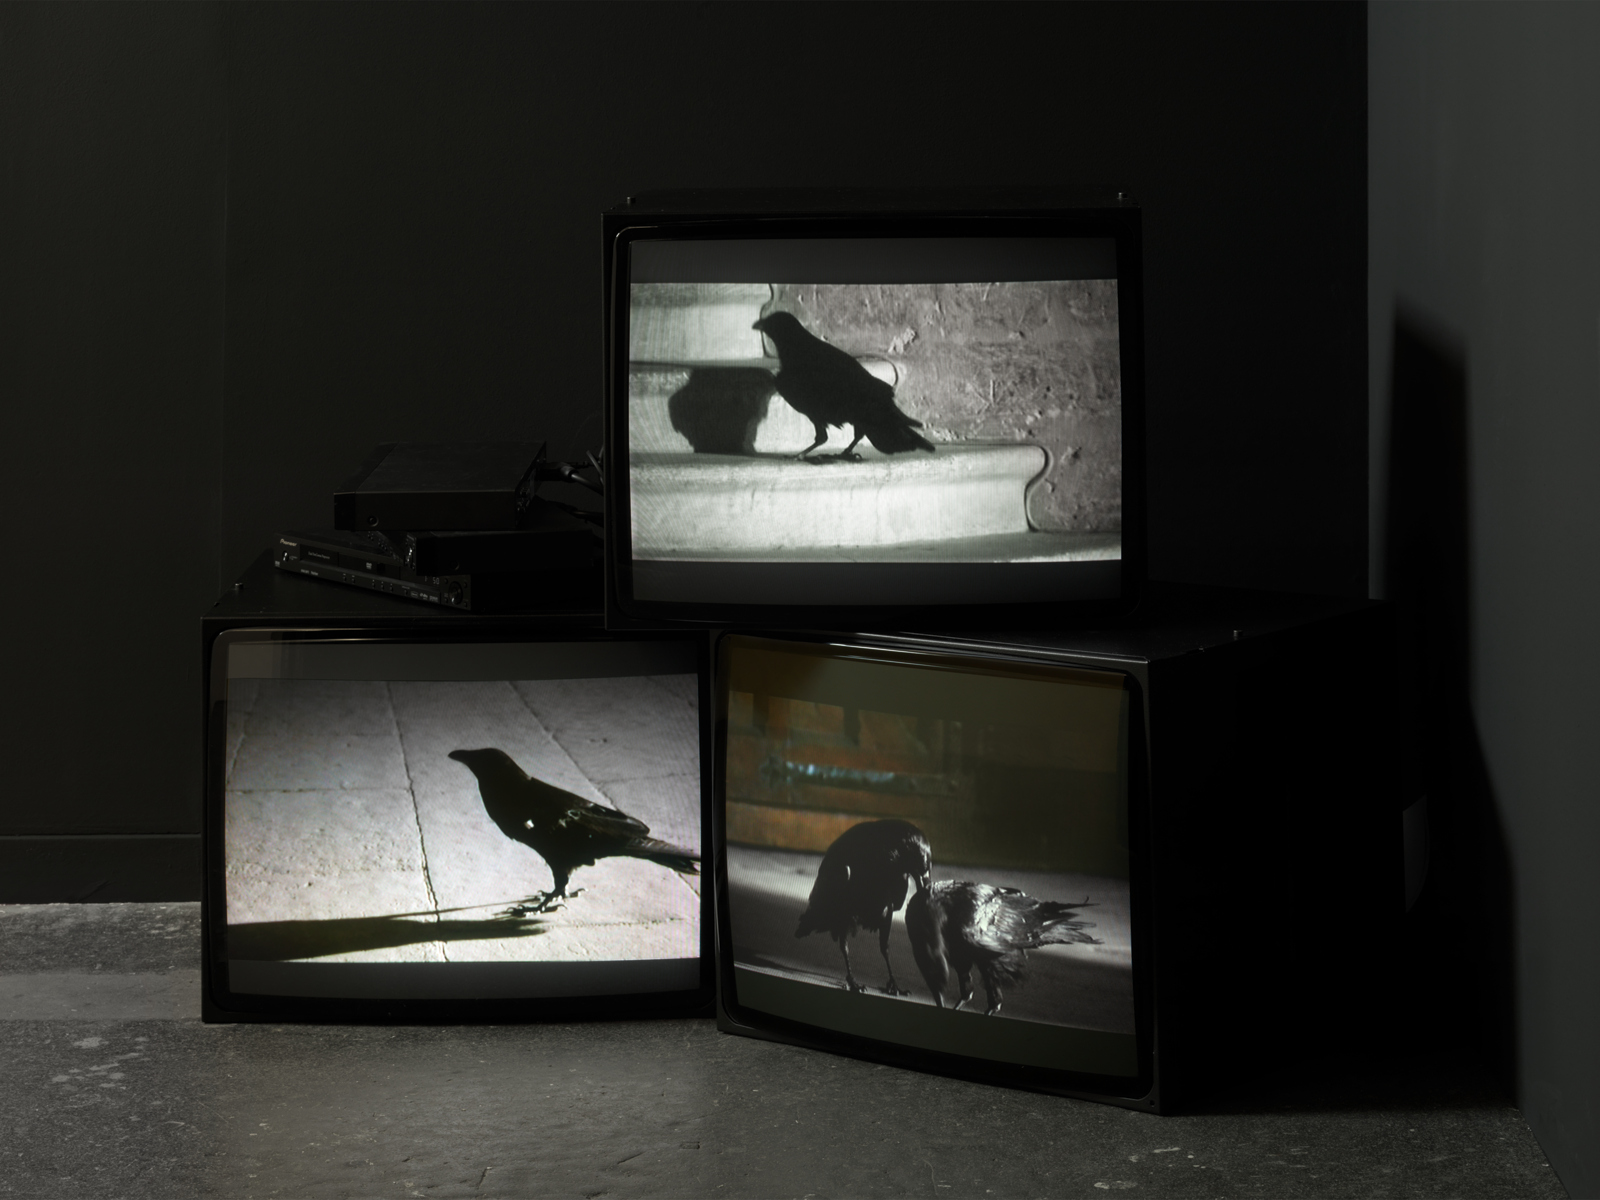 Douglas Gordon / "24 Hour Psycho Back and Forth and To and Fro", exhibition view, Galerie Eva Presenhuber, Zürich / 2009